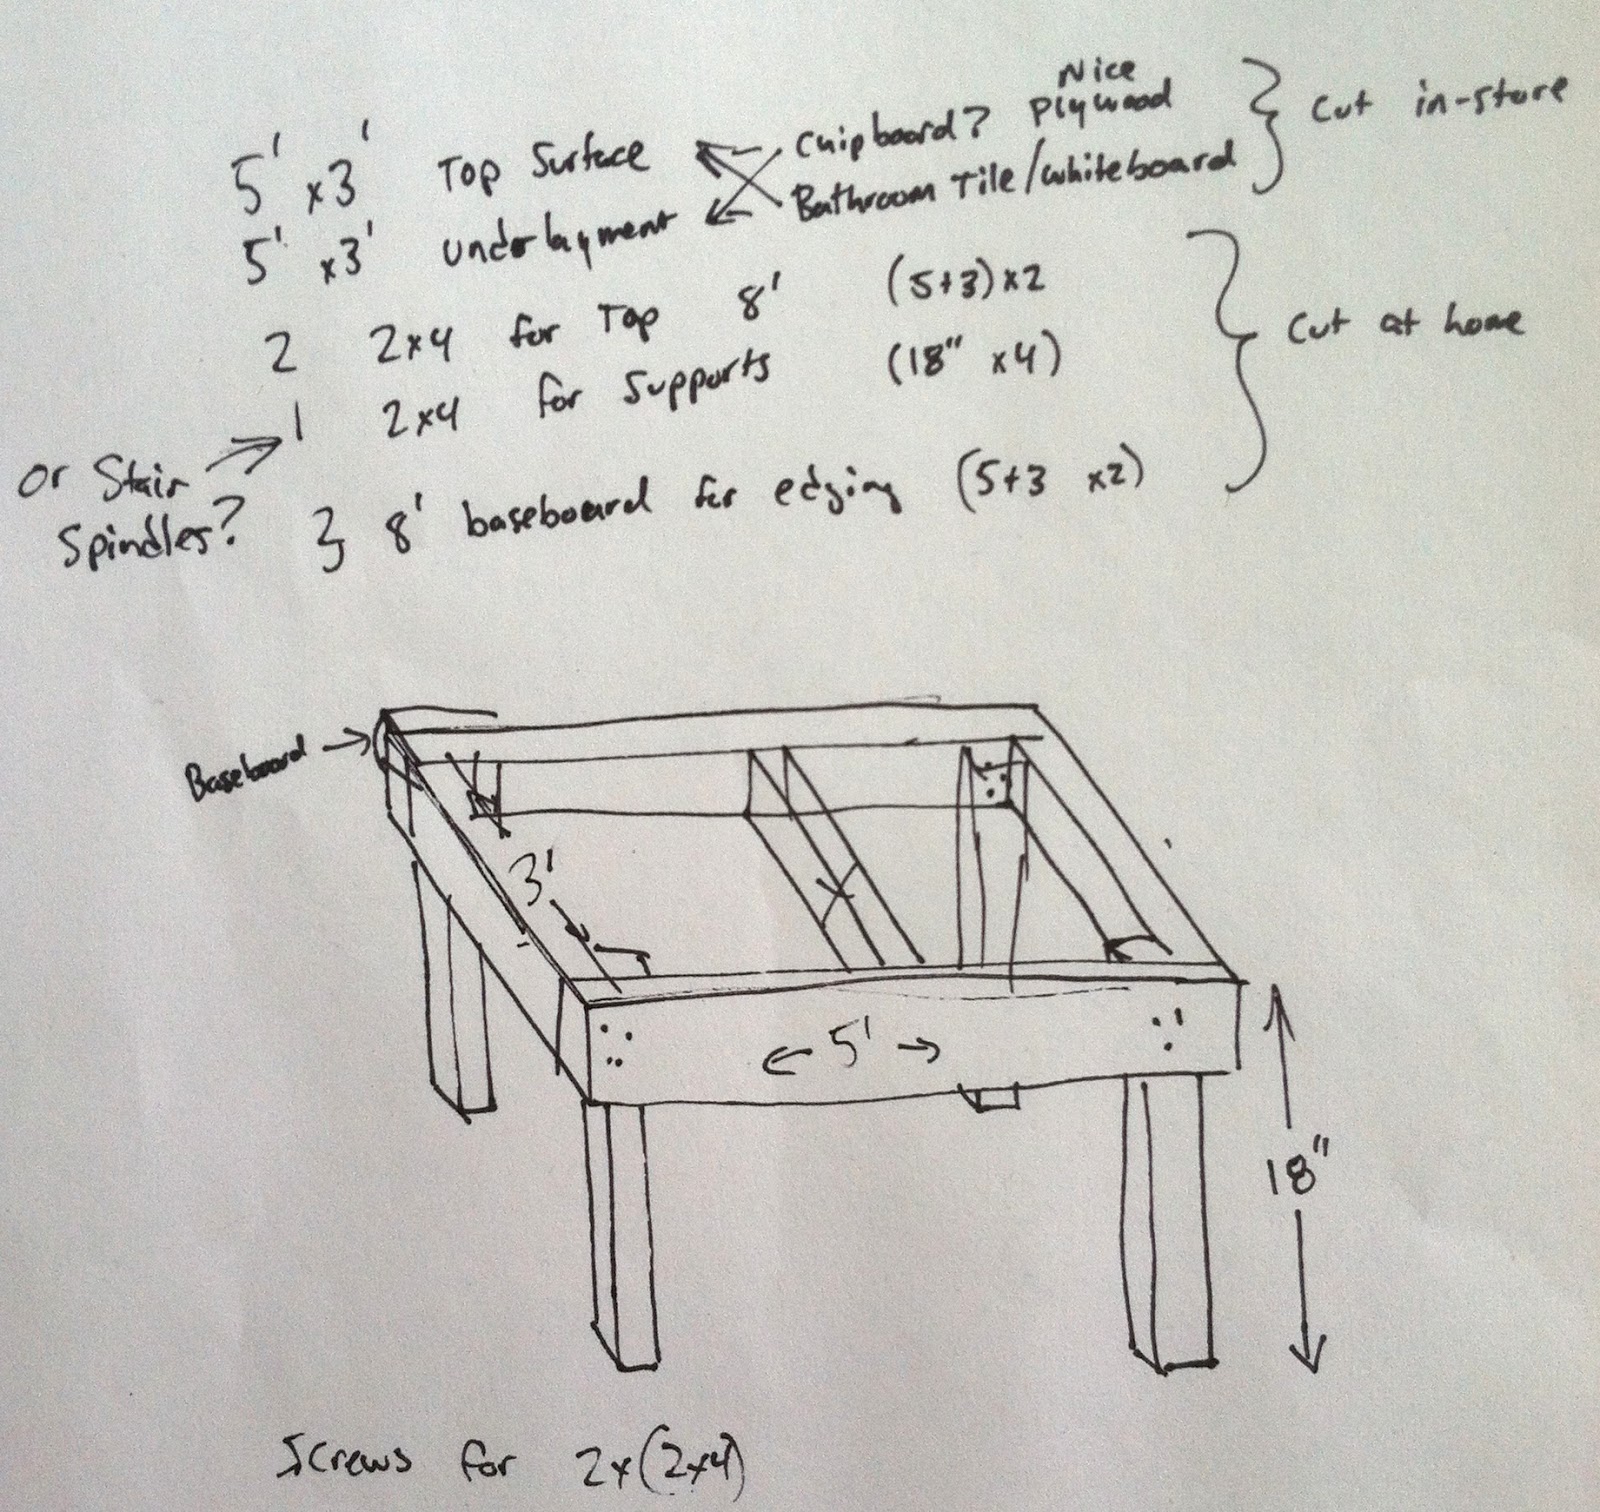 Woodworking plans wooden train table PDF Free Download